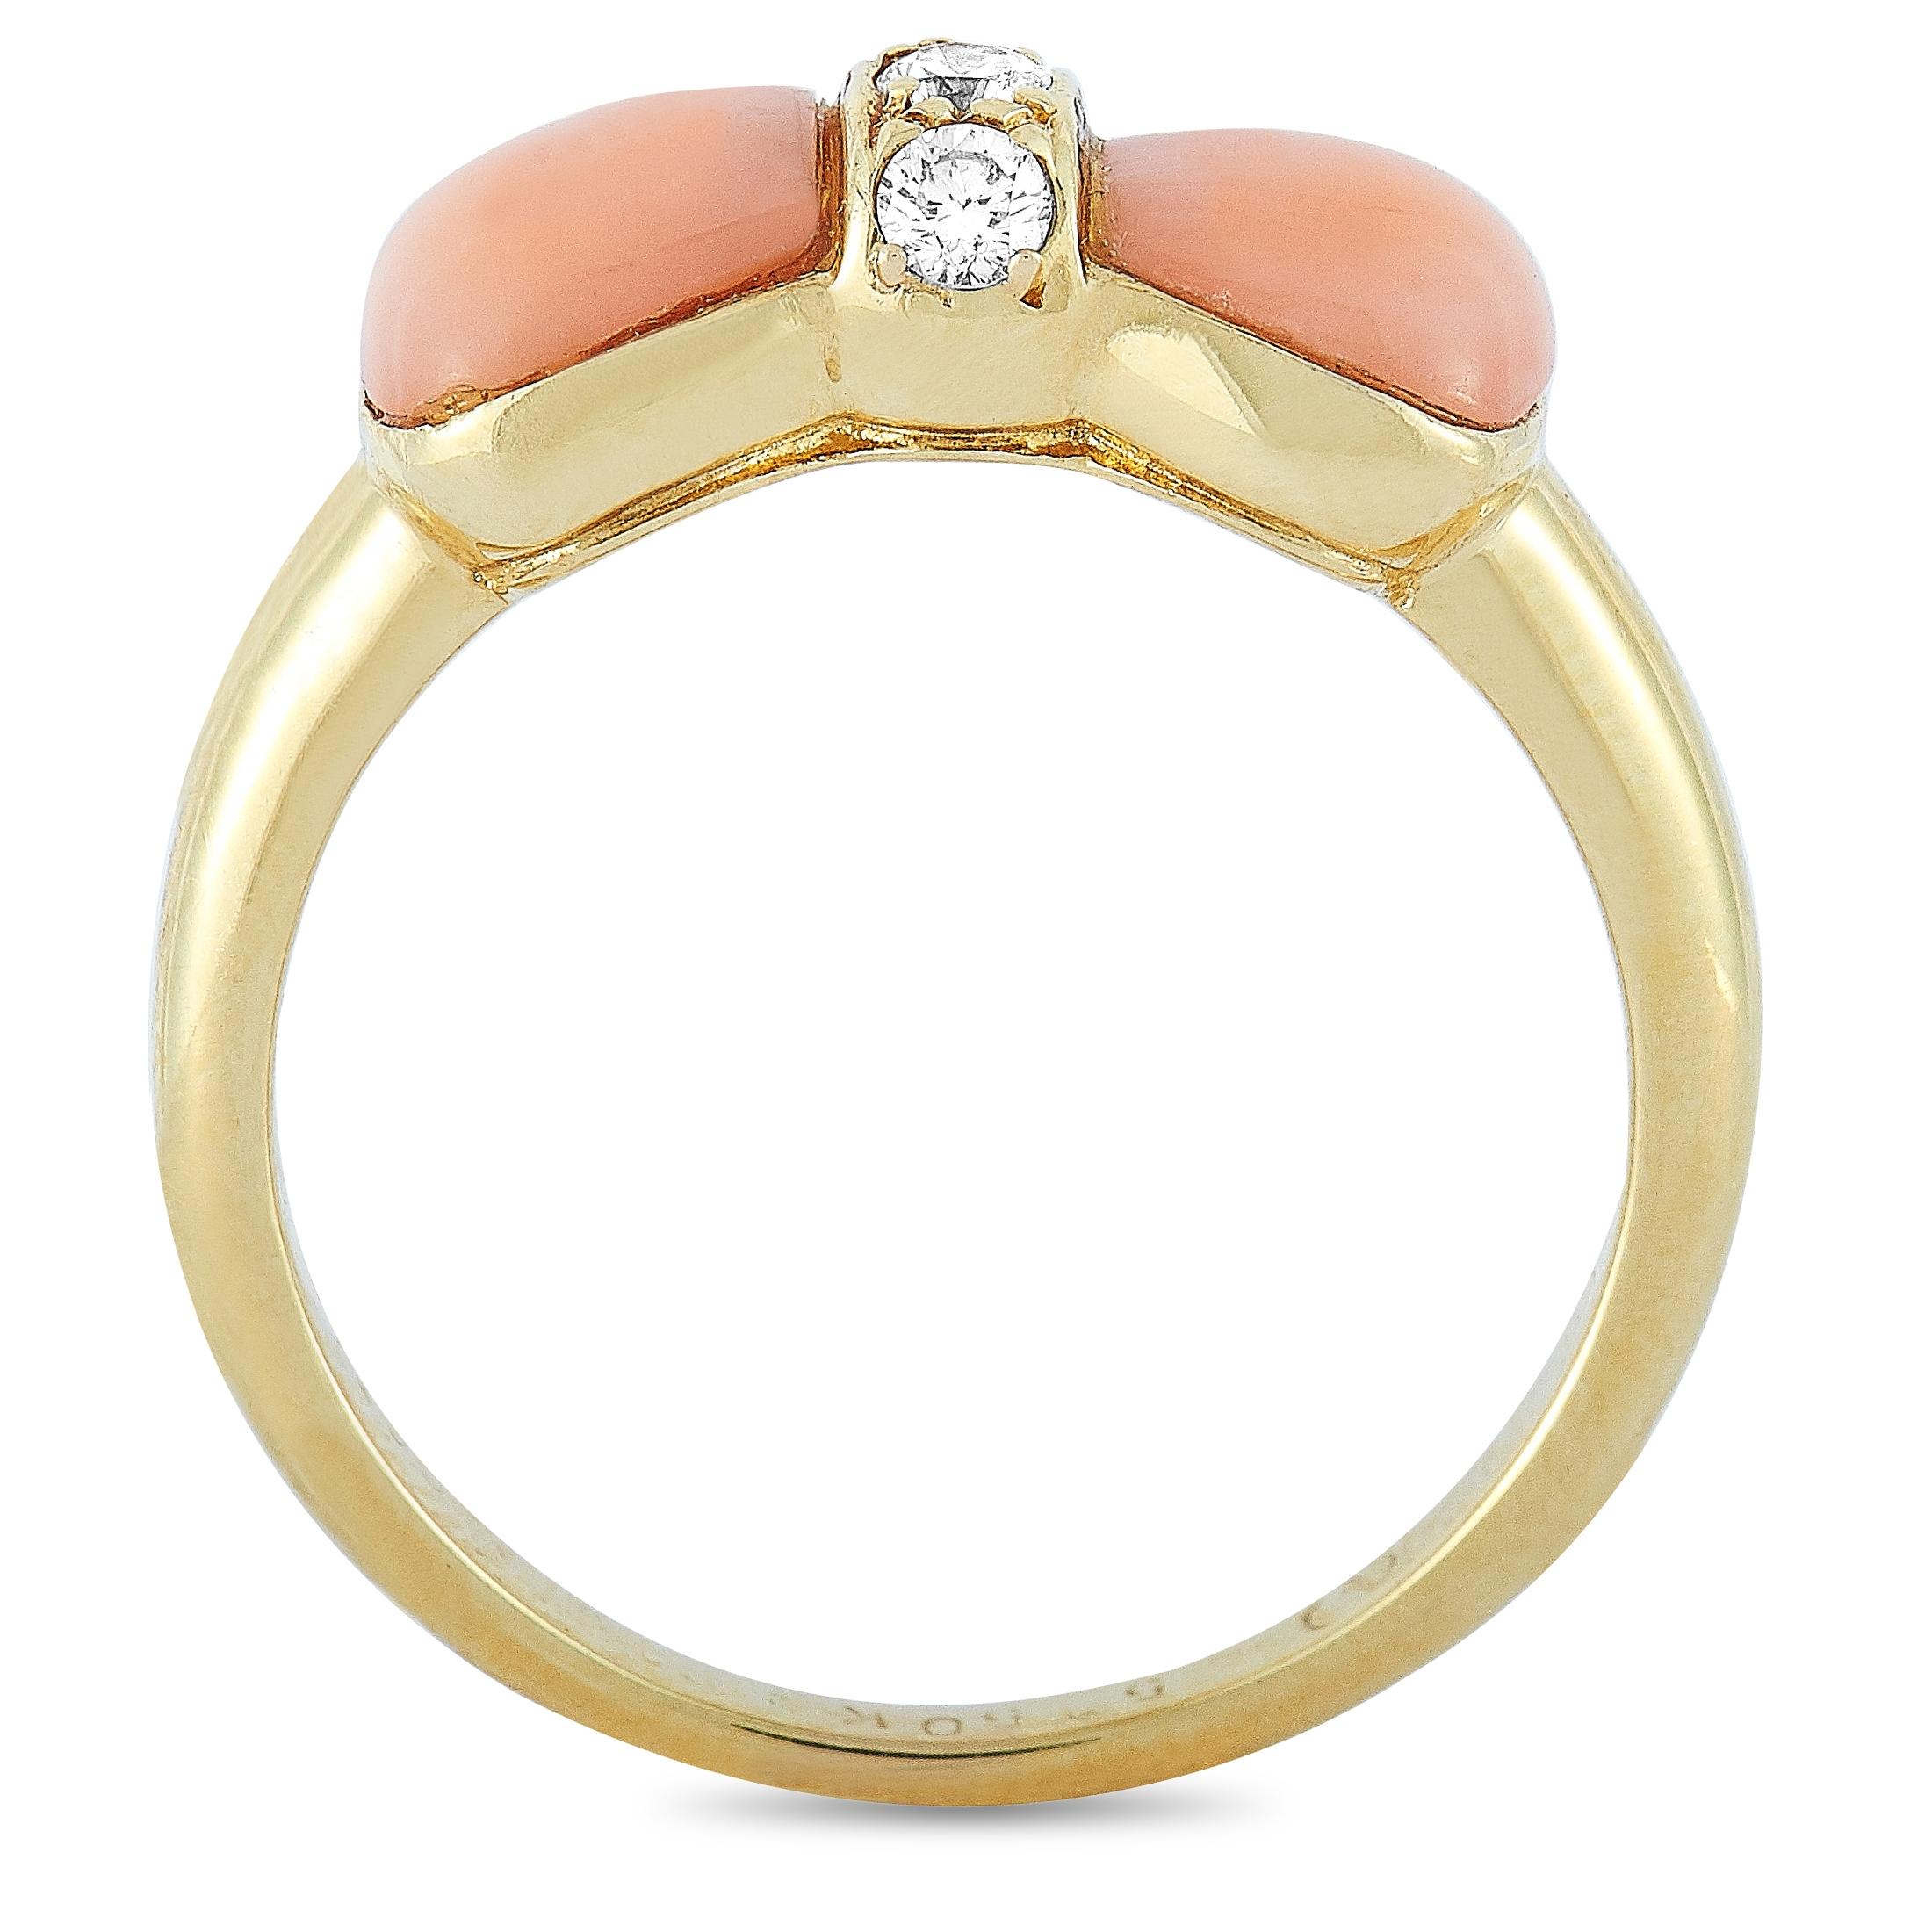 This vintage Van Cleef & Arpels bow ring is crafted from 18K yellow gold and embellished with diamonds and pink coral. The ring weighs 4.1 grams and boasts band thickness of 2 mm and top height of 4 mm, while top dimensions measure 14 by 6 mm.
Ring